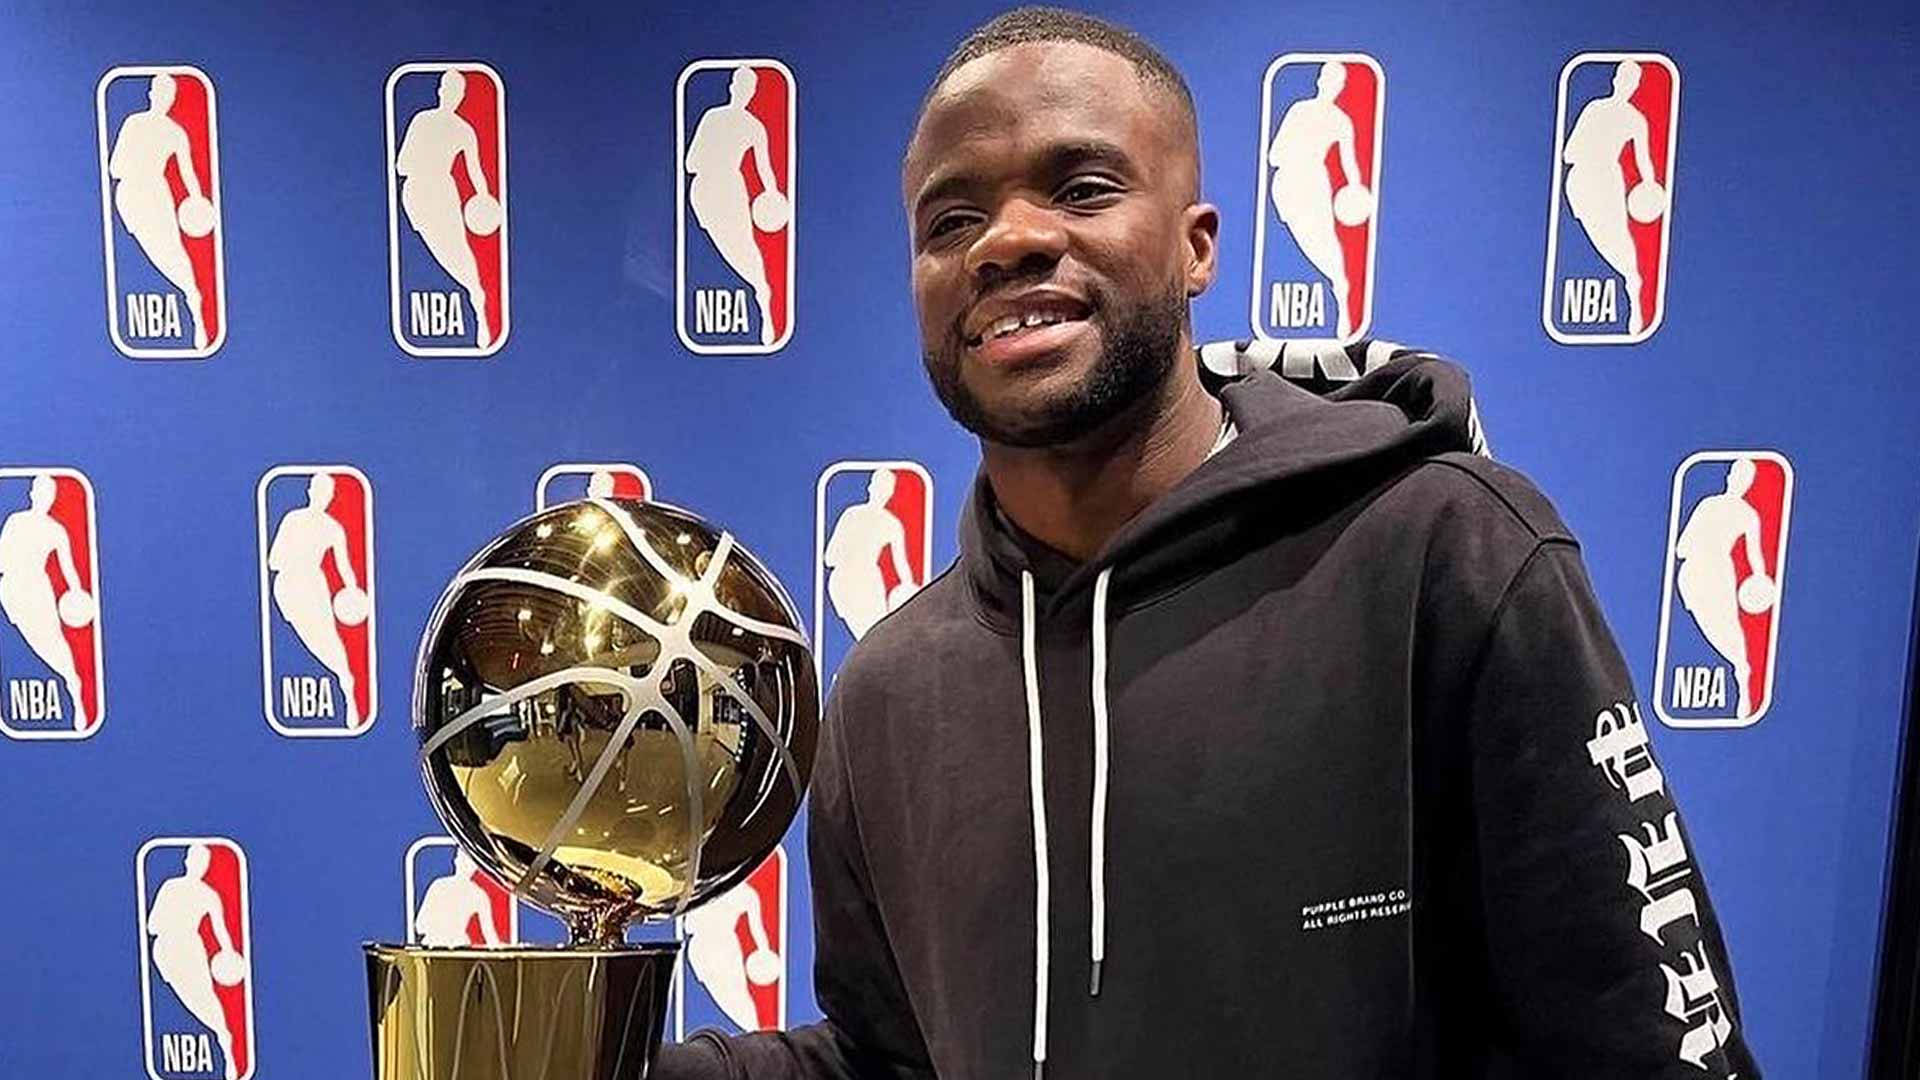 Frances Tiafoe visited the NBA offices during the offseason.